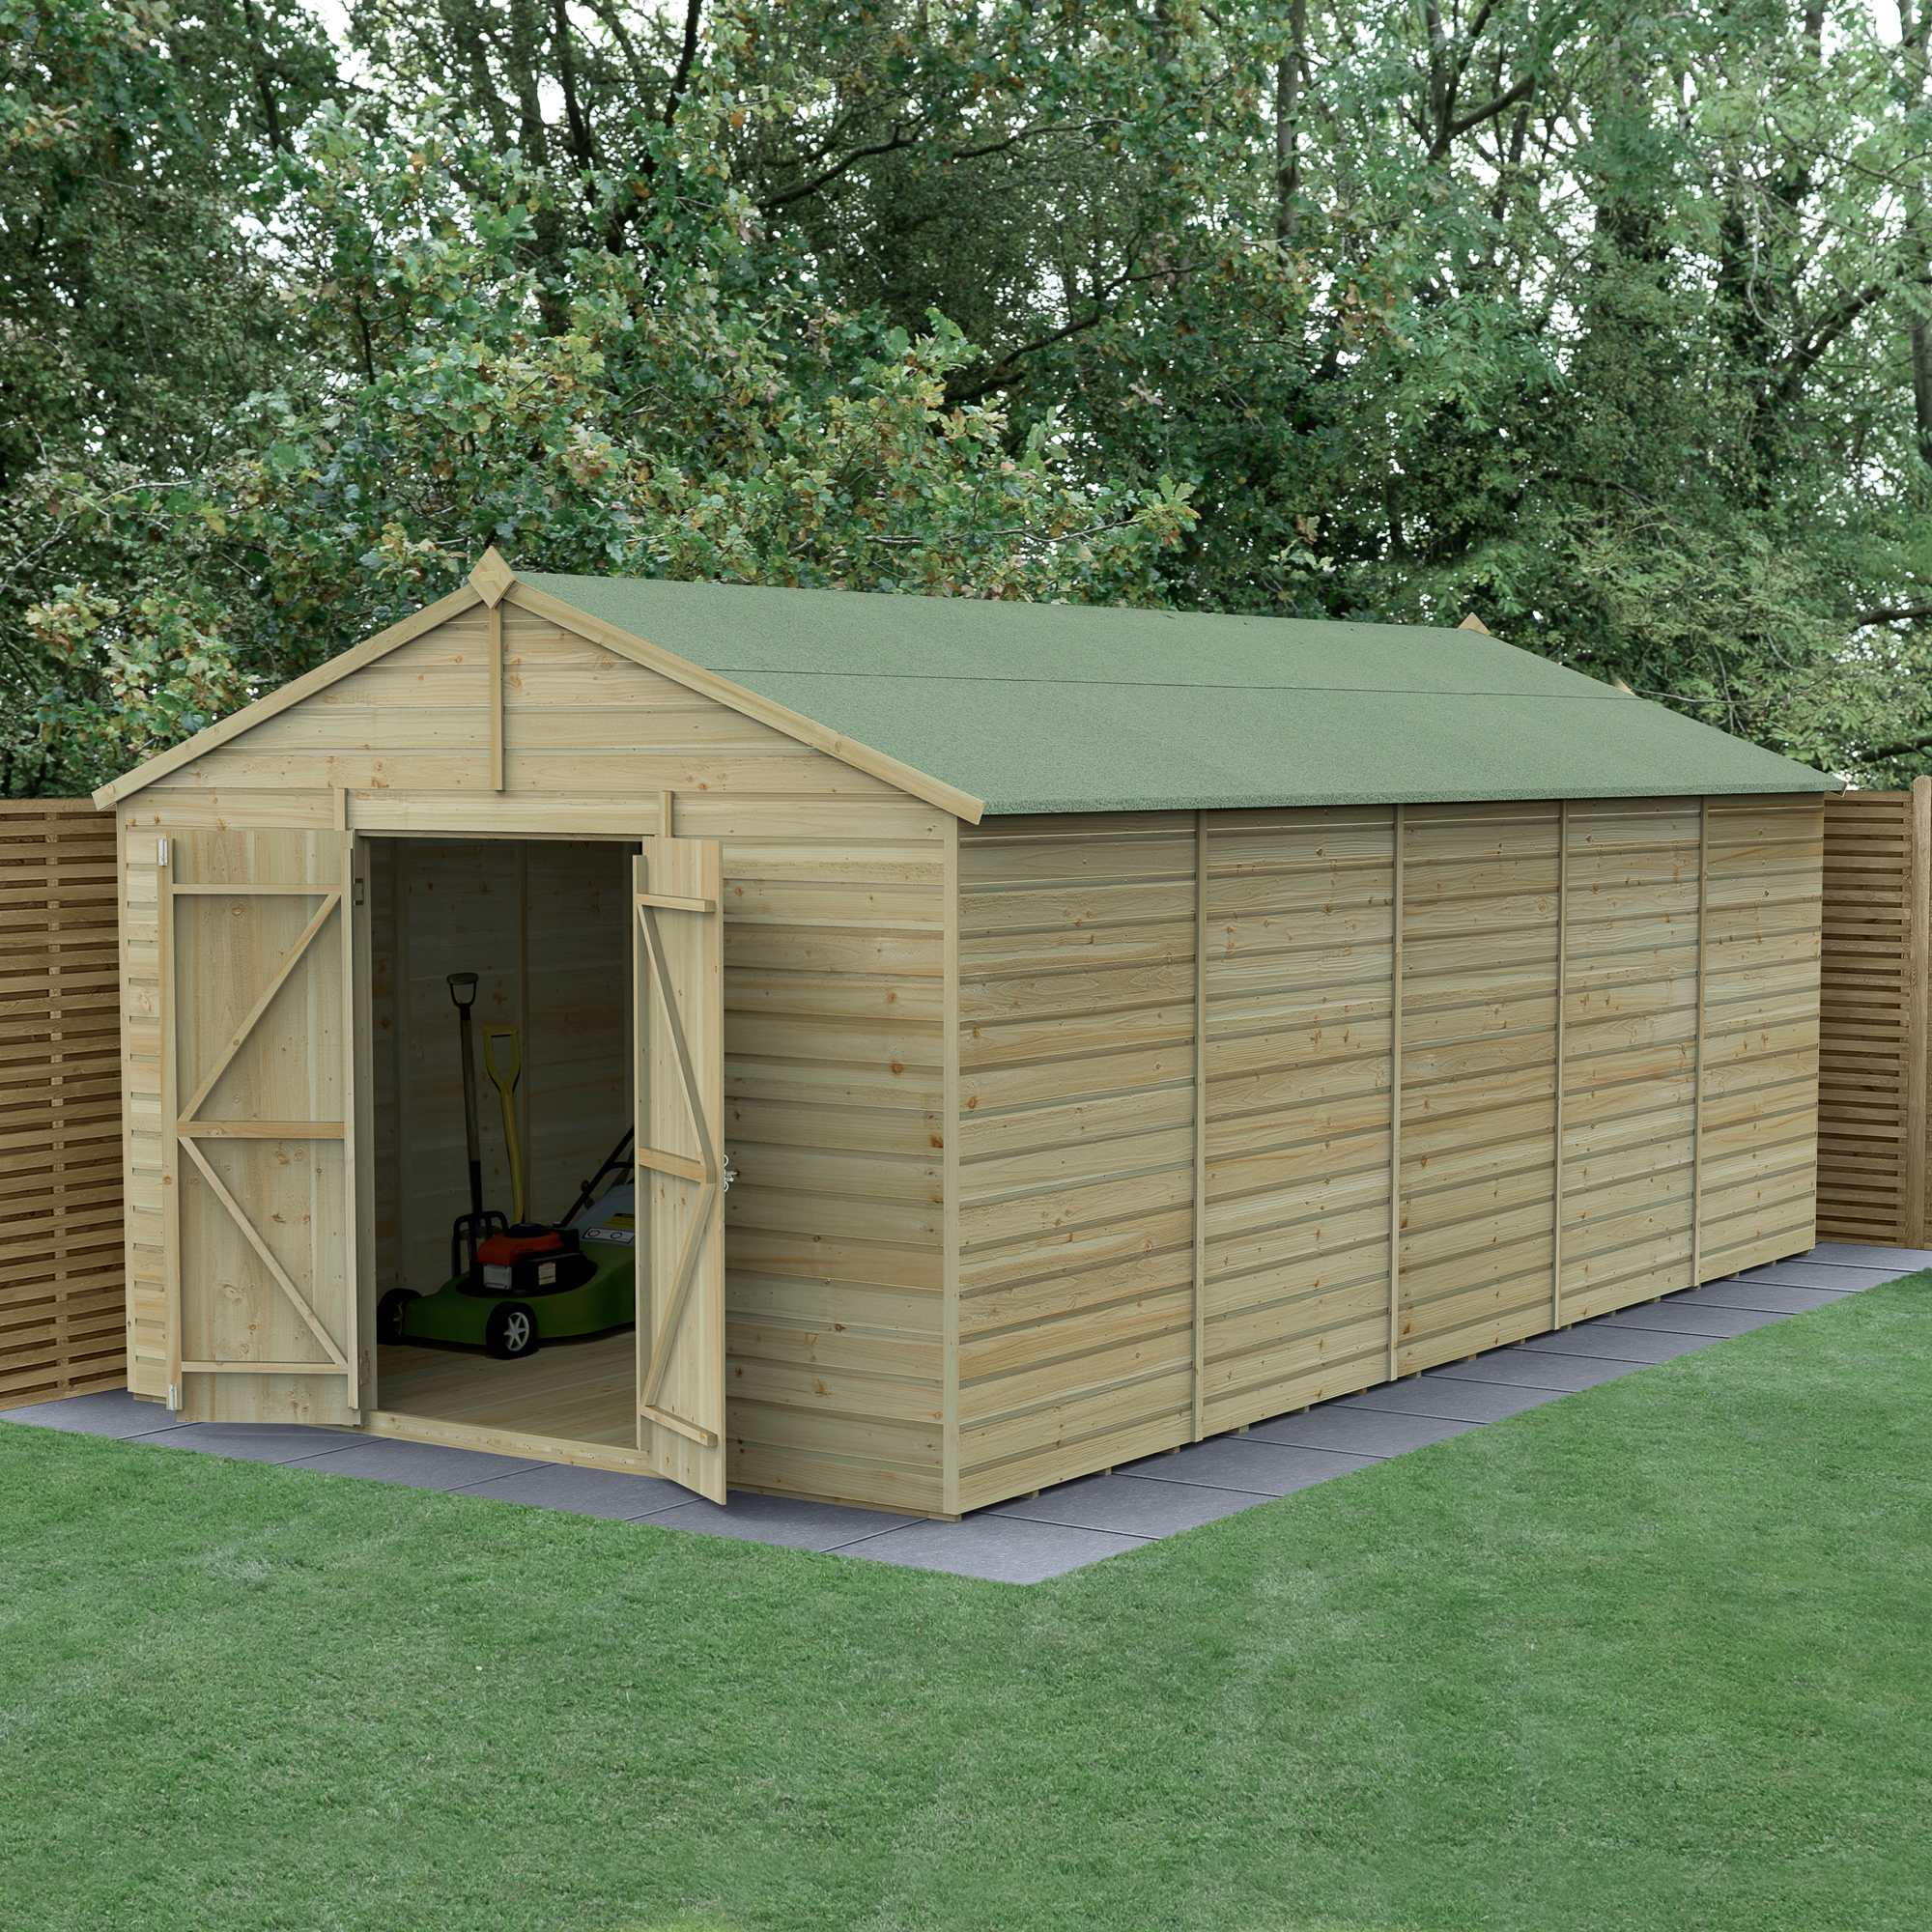 Forest Garden Beckwood 10 x 20ft Apex Shiplap Pressure Treated Double Door Windowless Shed